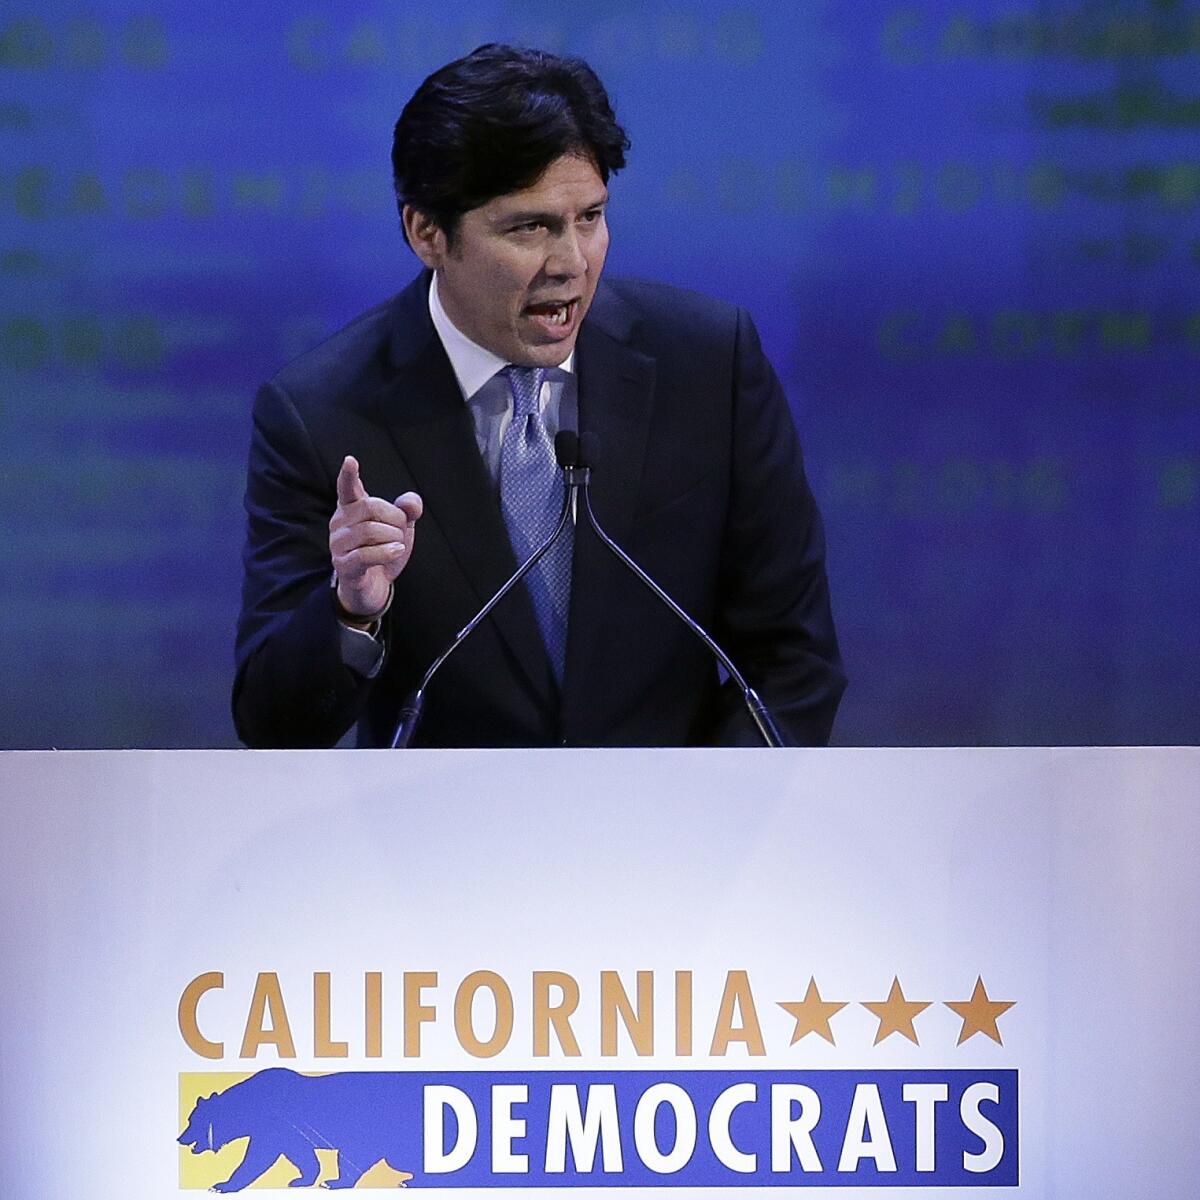 Senate President Pro Tem Kevin de León gestures while speaking before the California Democrats State Convention in San Jose on Feb. 27.